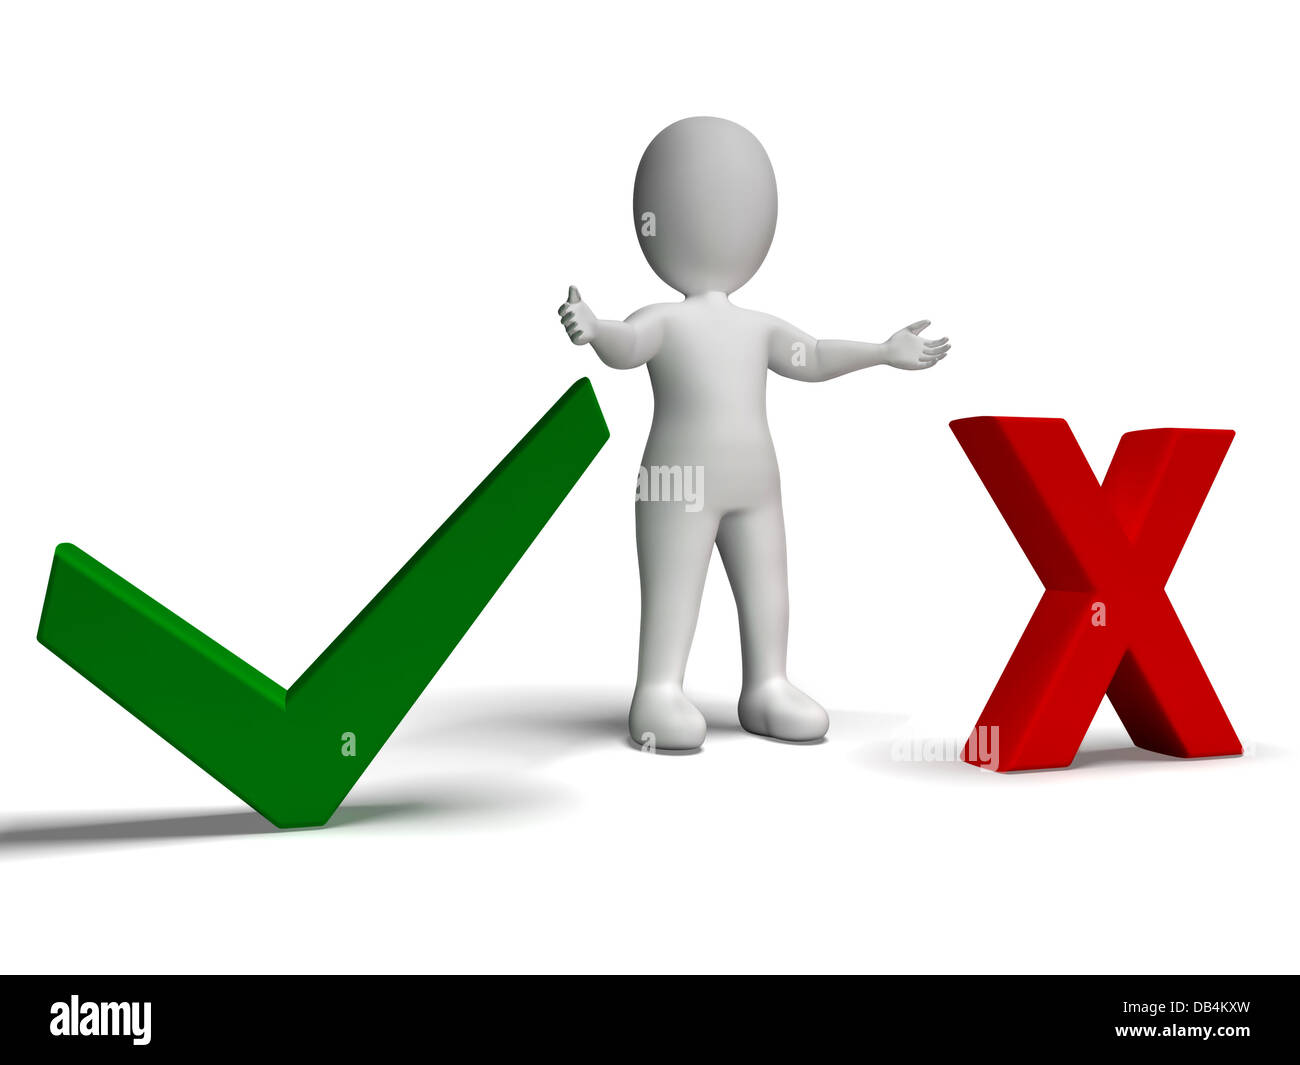 Tick And Cross Symbols In Front Shows Choice Or Decision Stock Photo